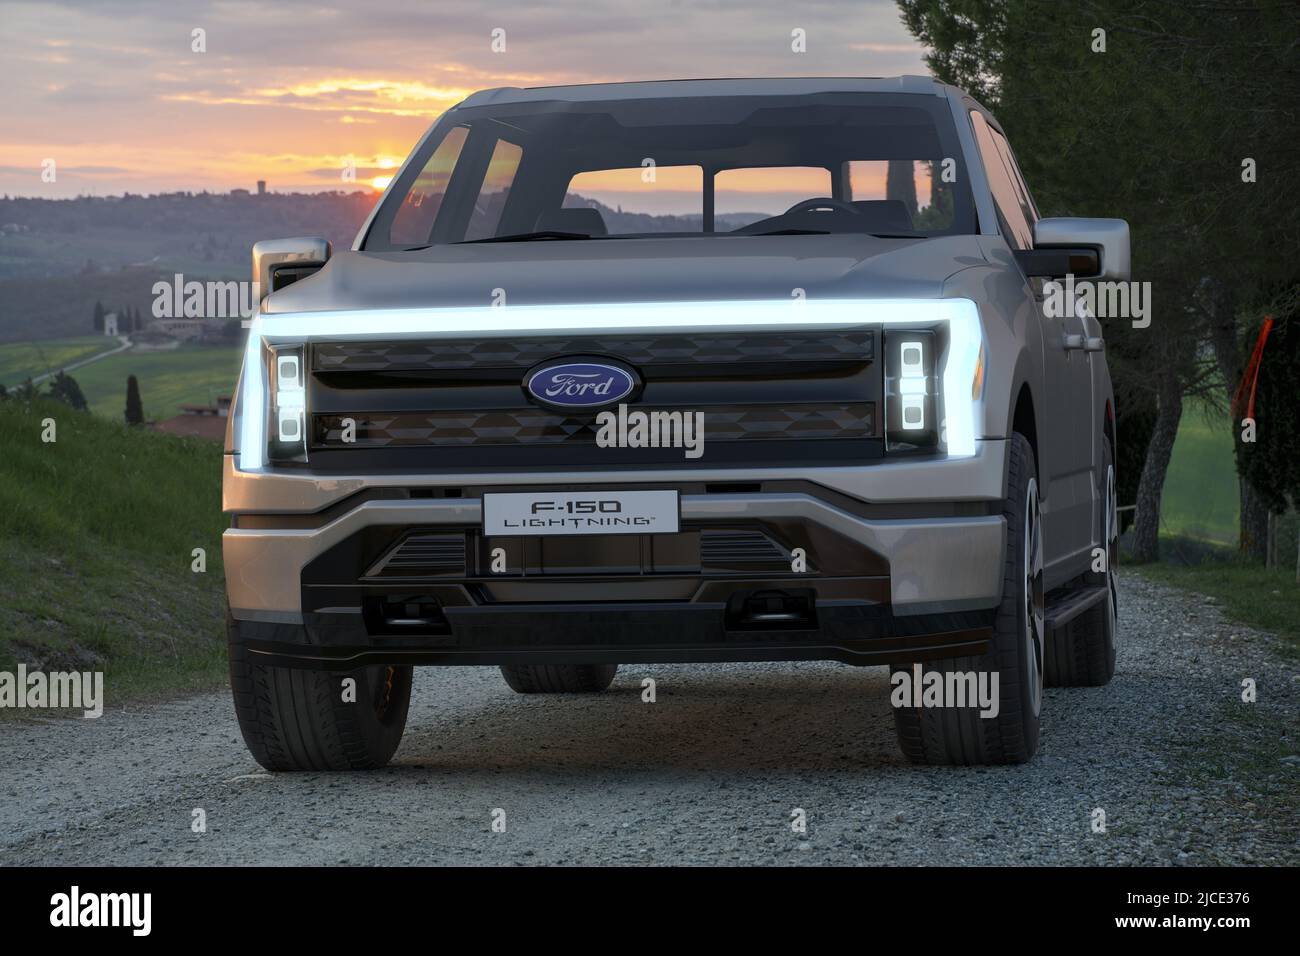 Ford F-150 Lightning Electric Truck Stock Photo